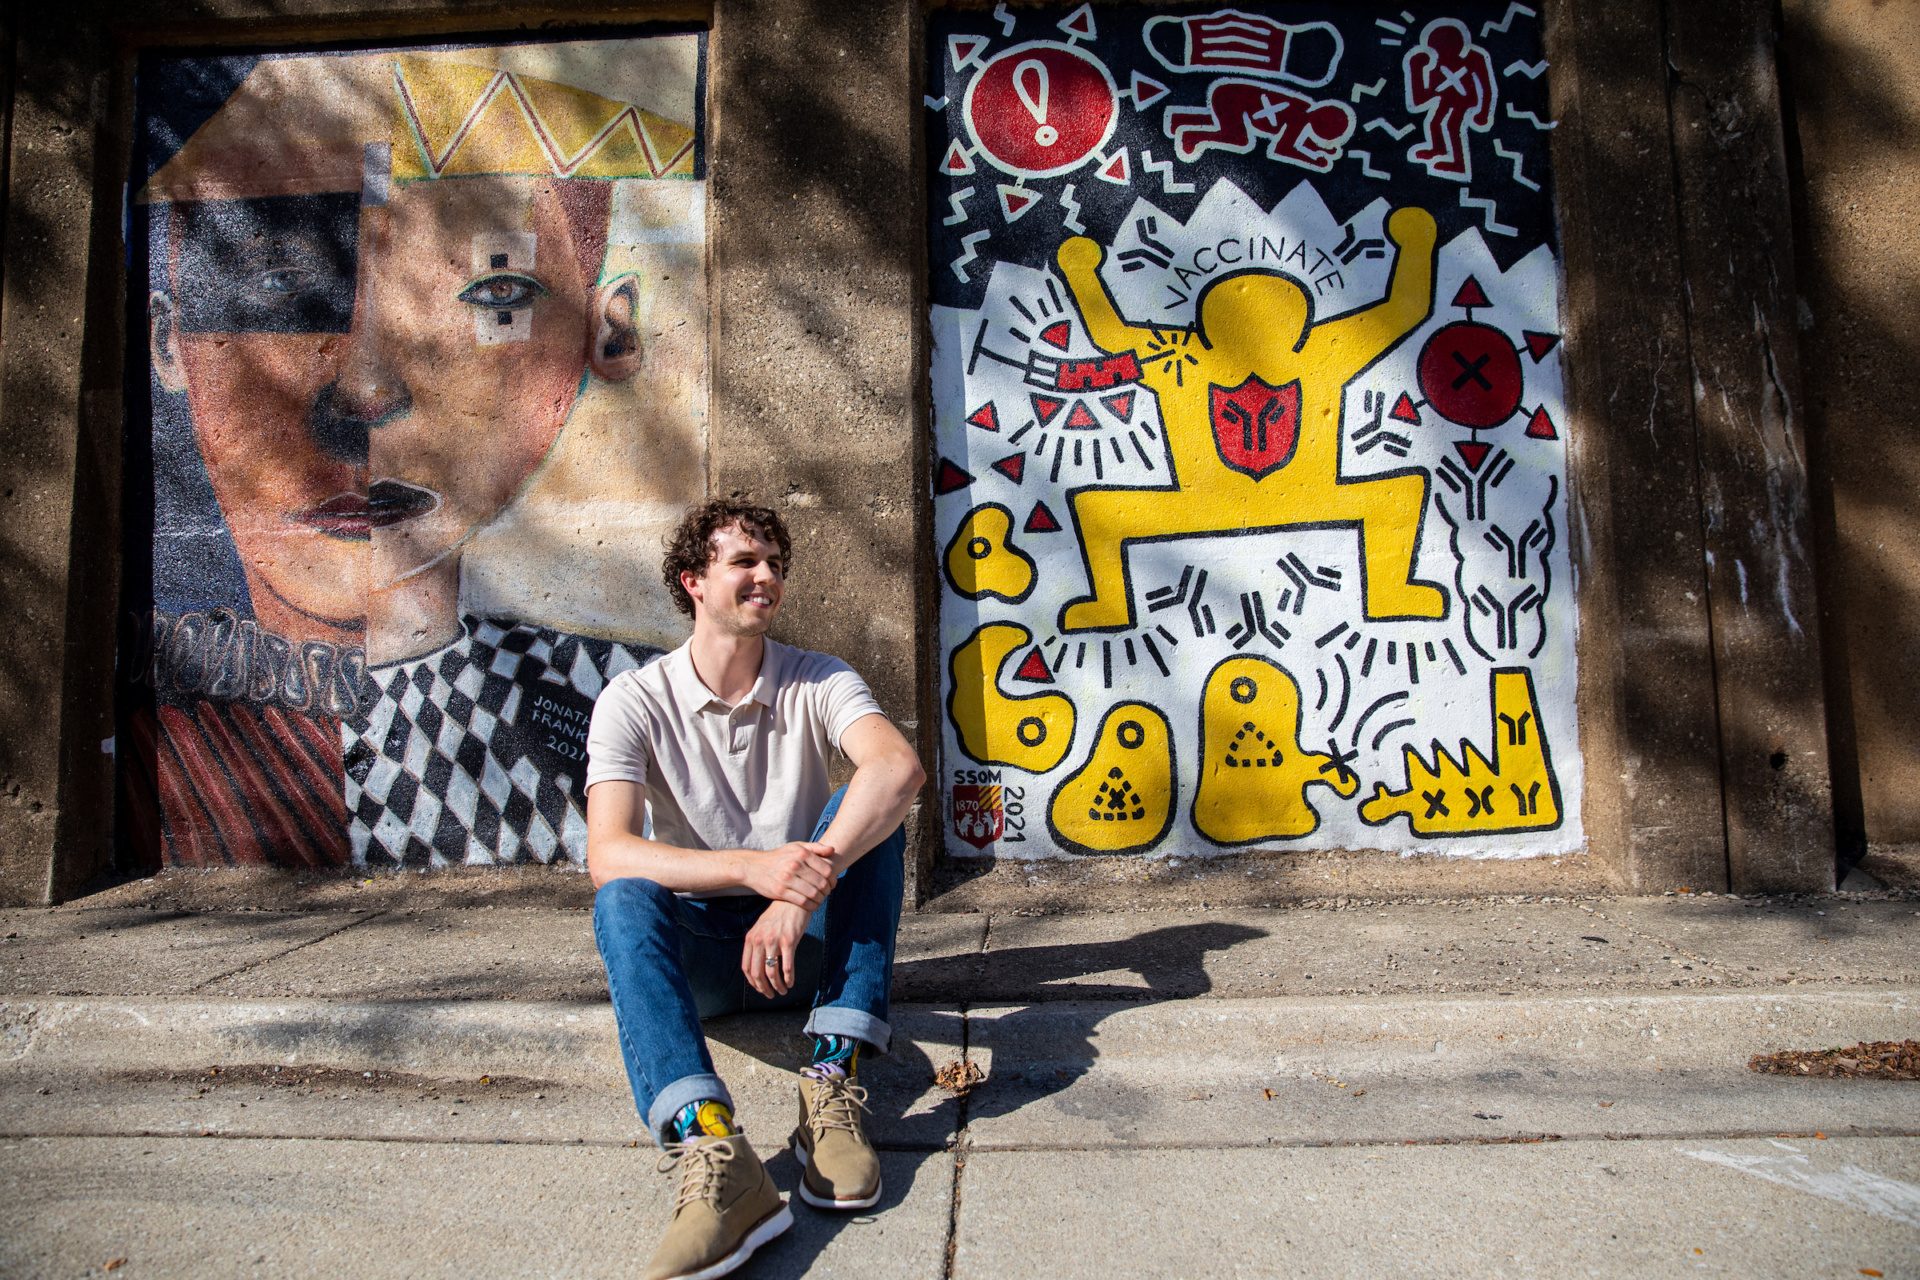 A man sits outdoors in front of a mural depicting a human getting vaccinated and fighting images of illness